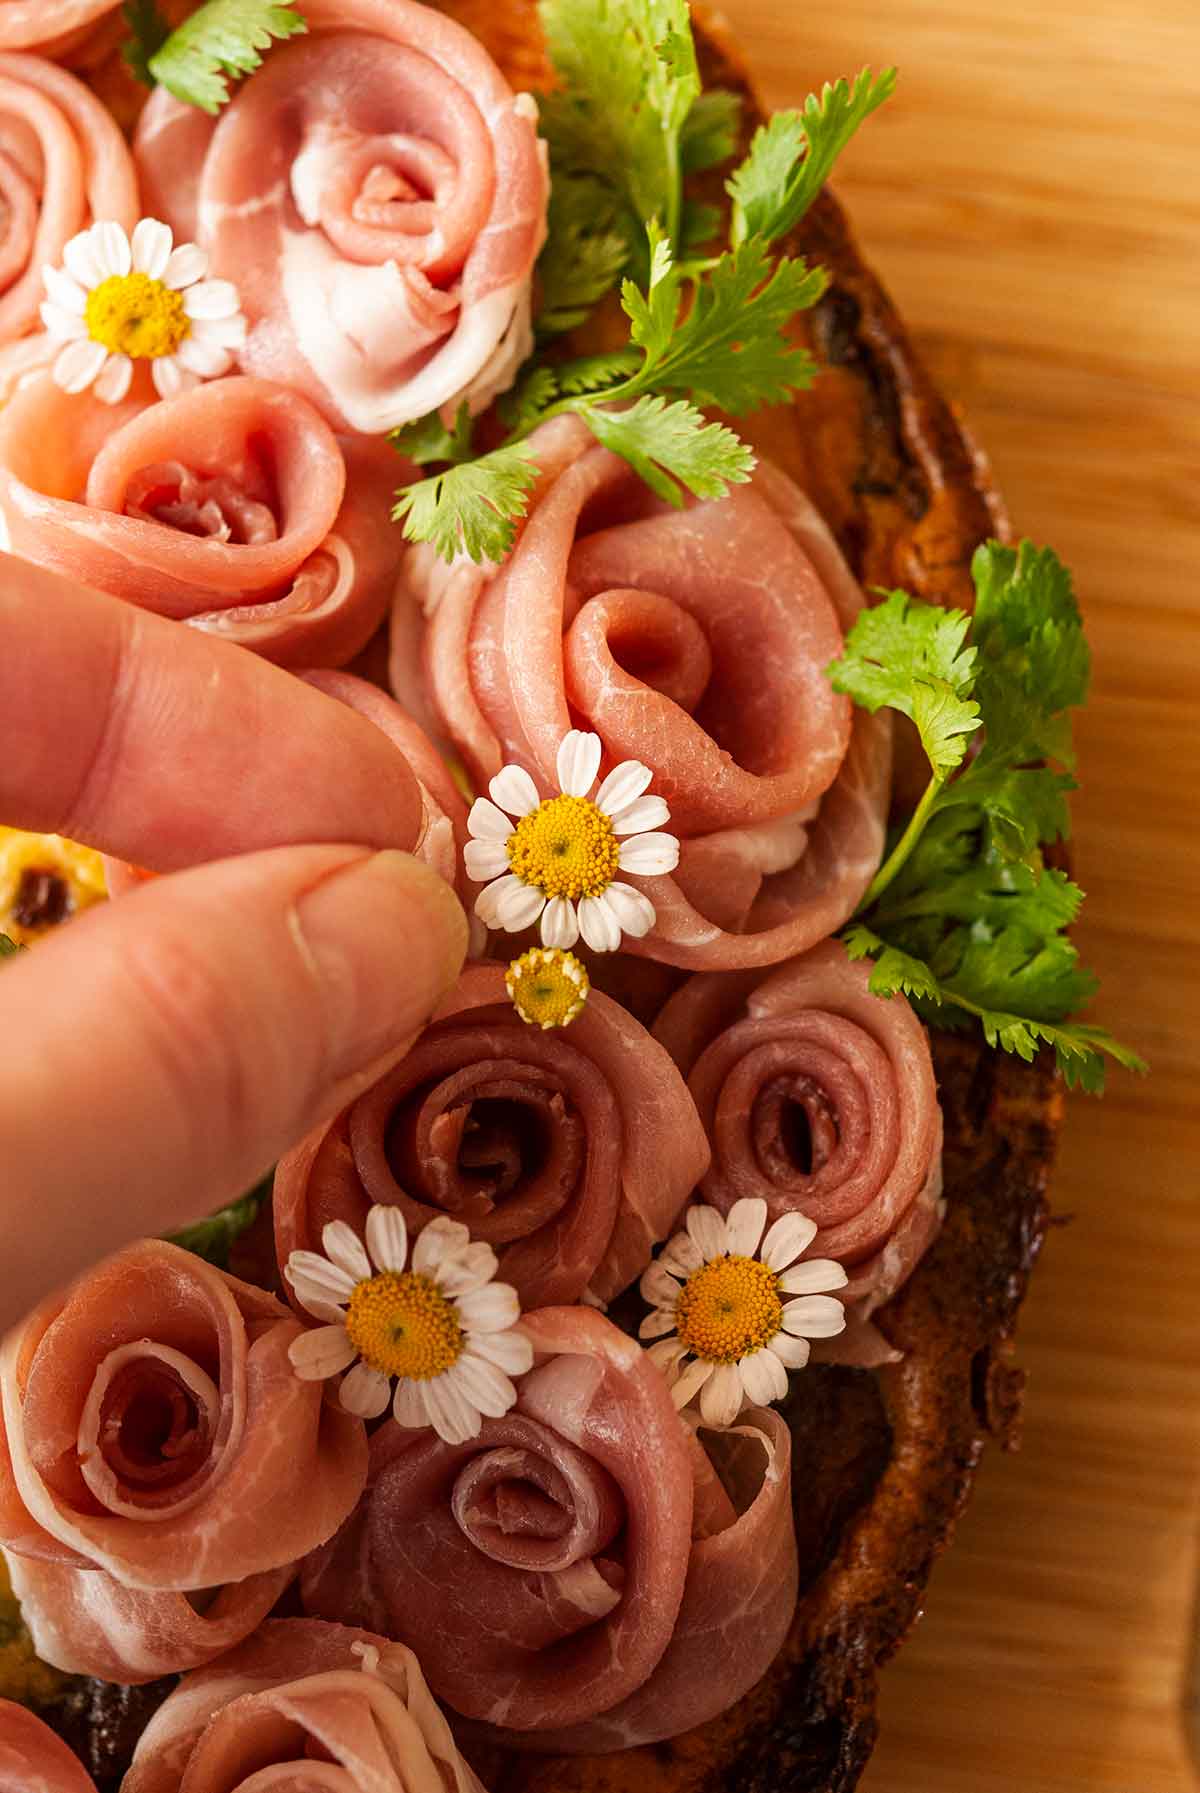 Fingers placing a small flower within a prosciutto rose wreath on a quiche.